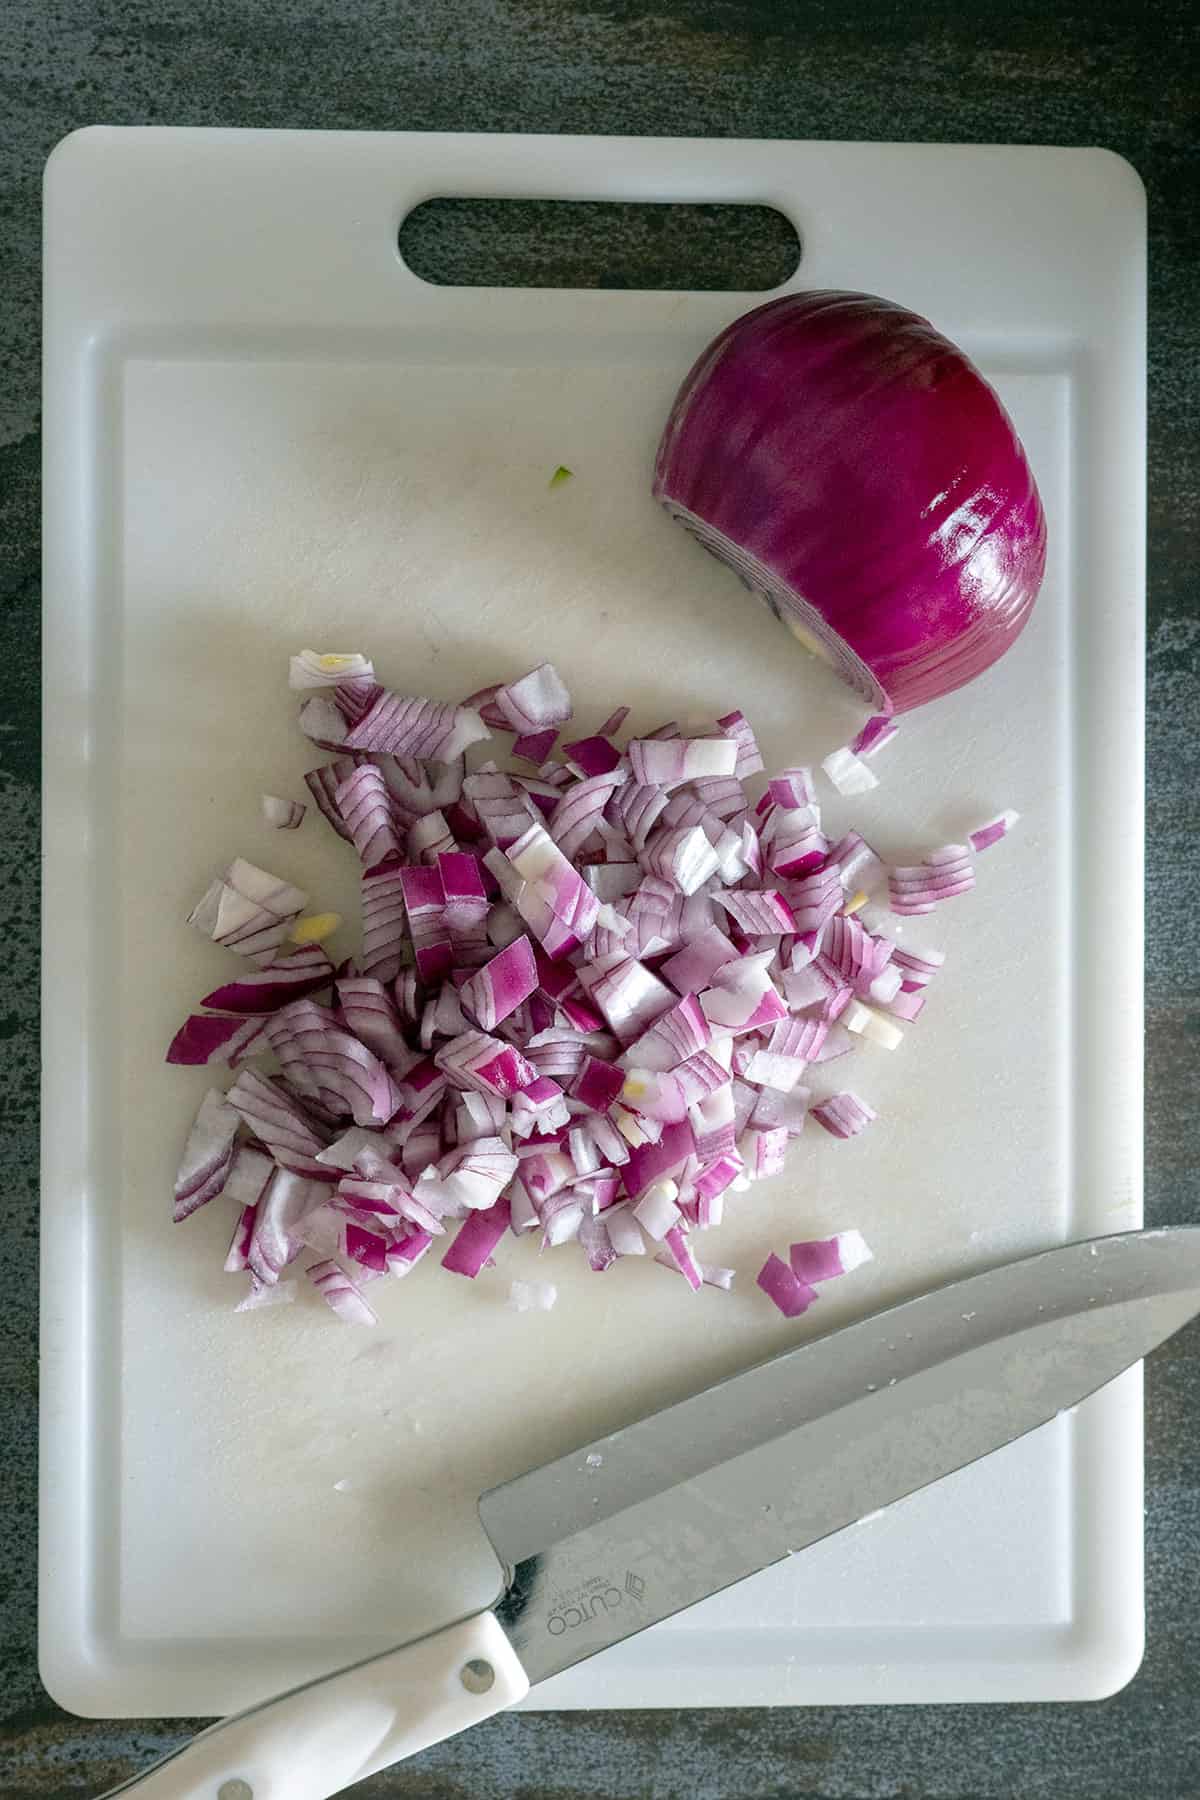 red onion on cutting board diced.